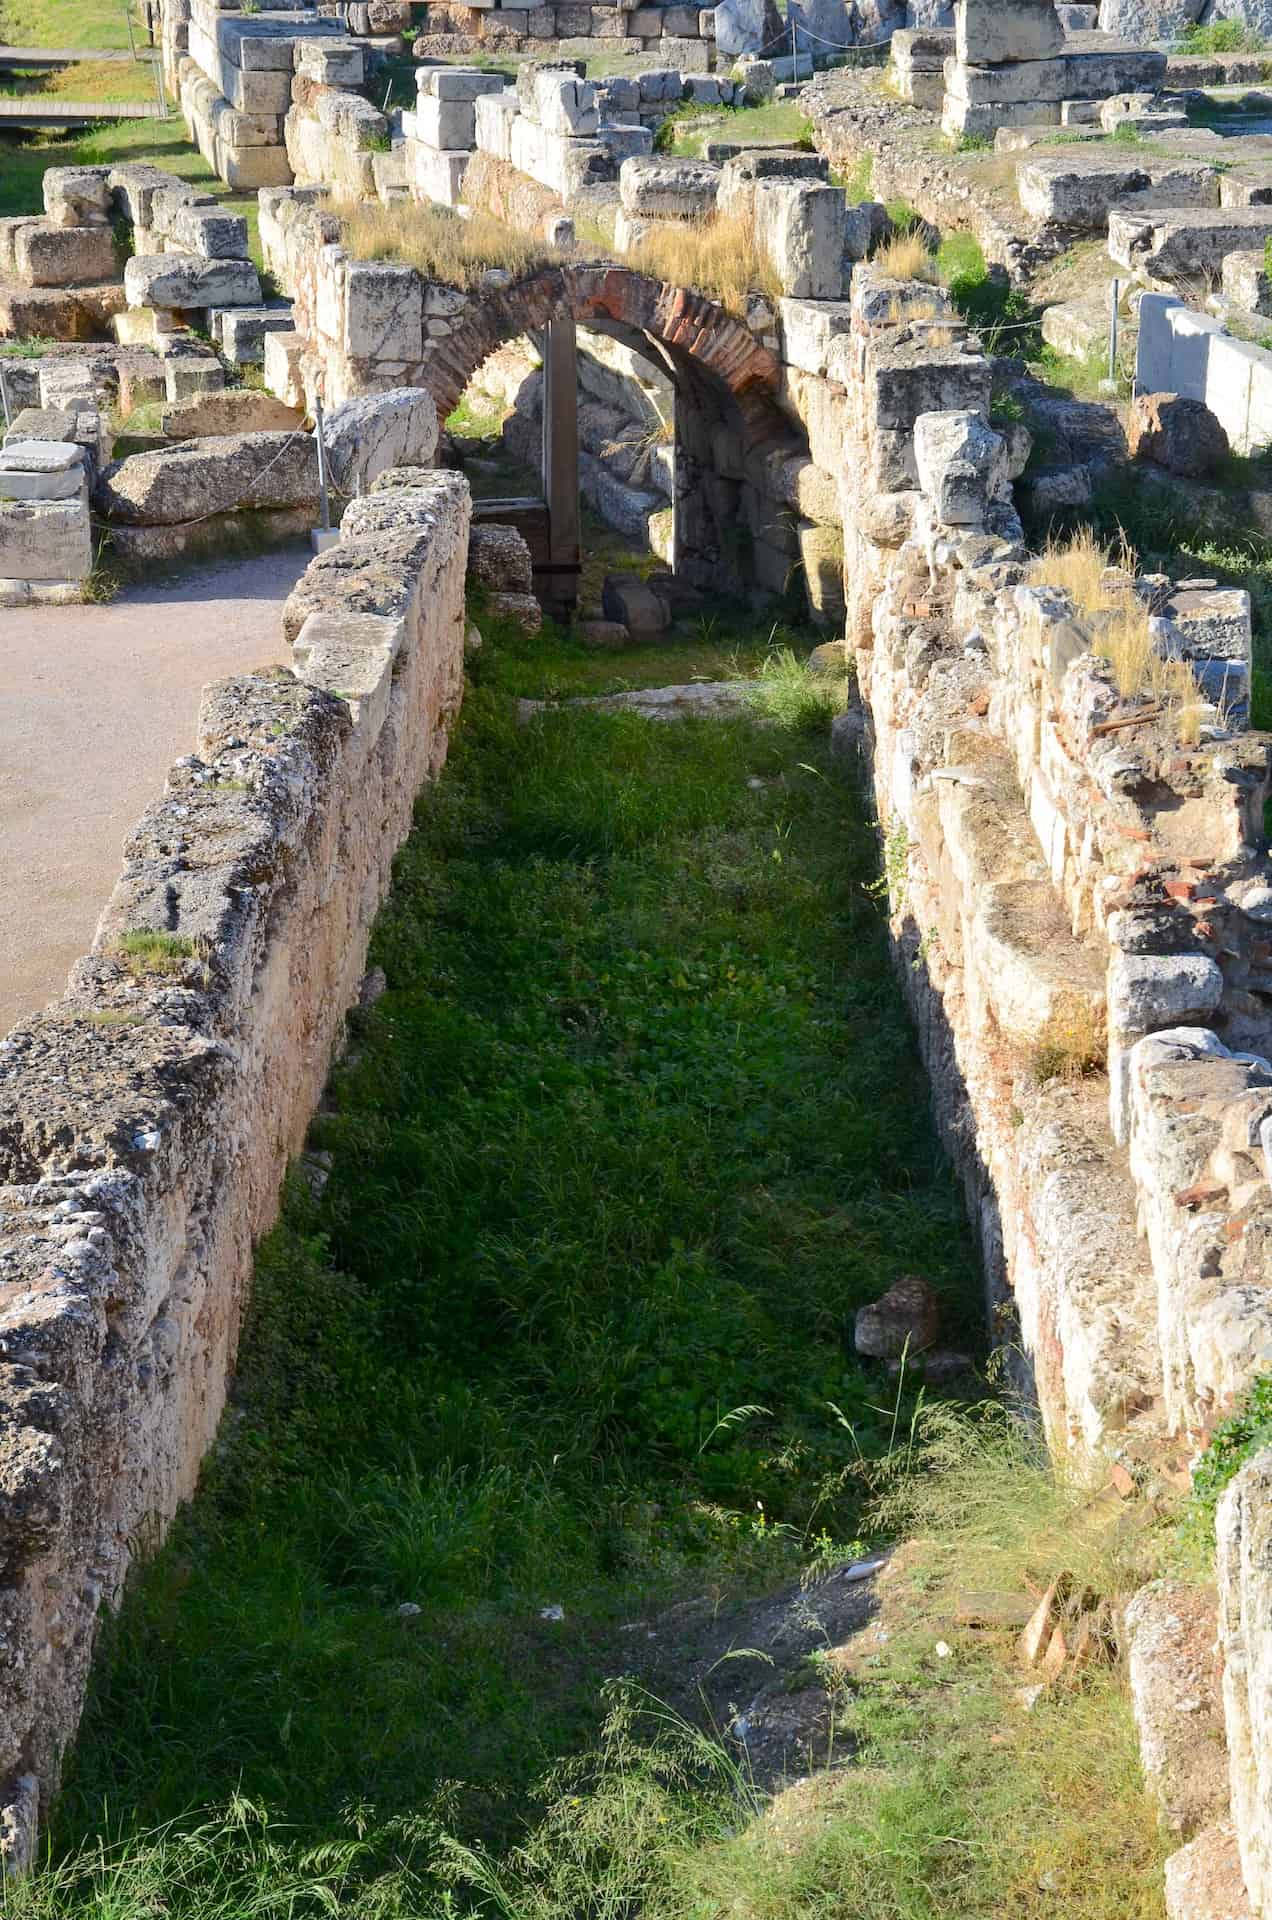 Channel of the Eridanos River at the Kerameikos Archaeological Site in Athens, Greece